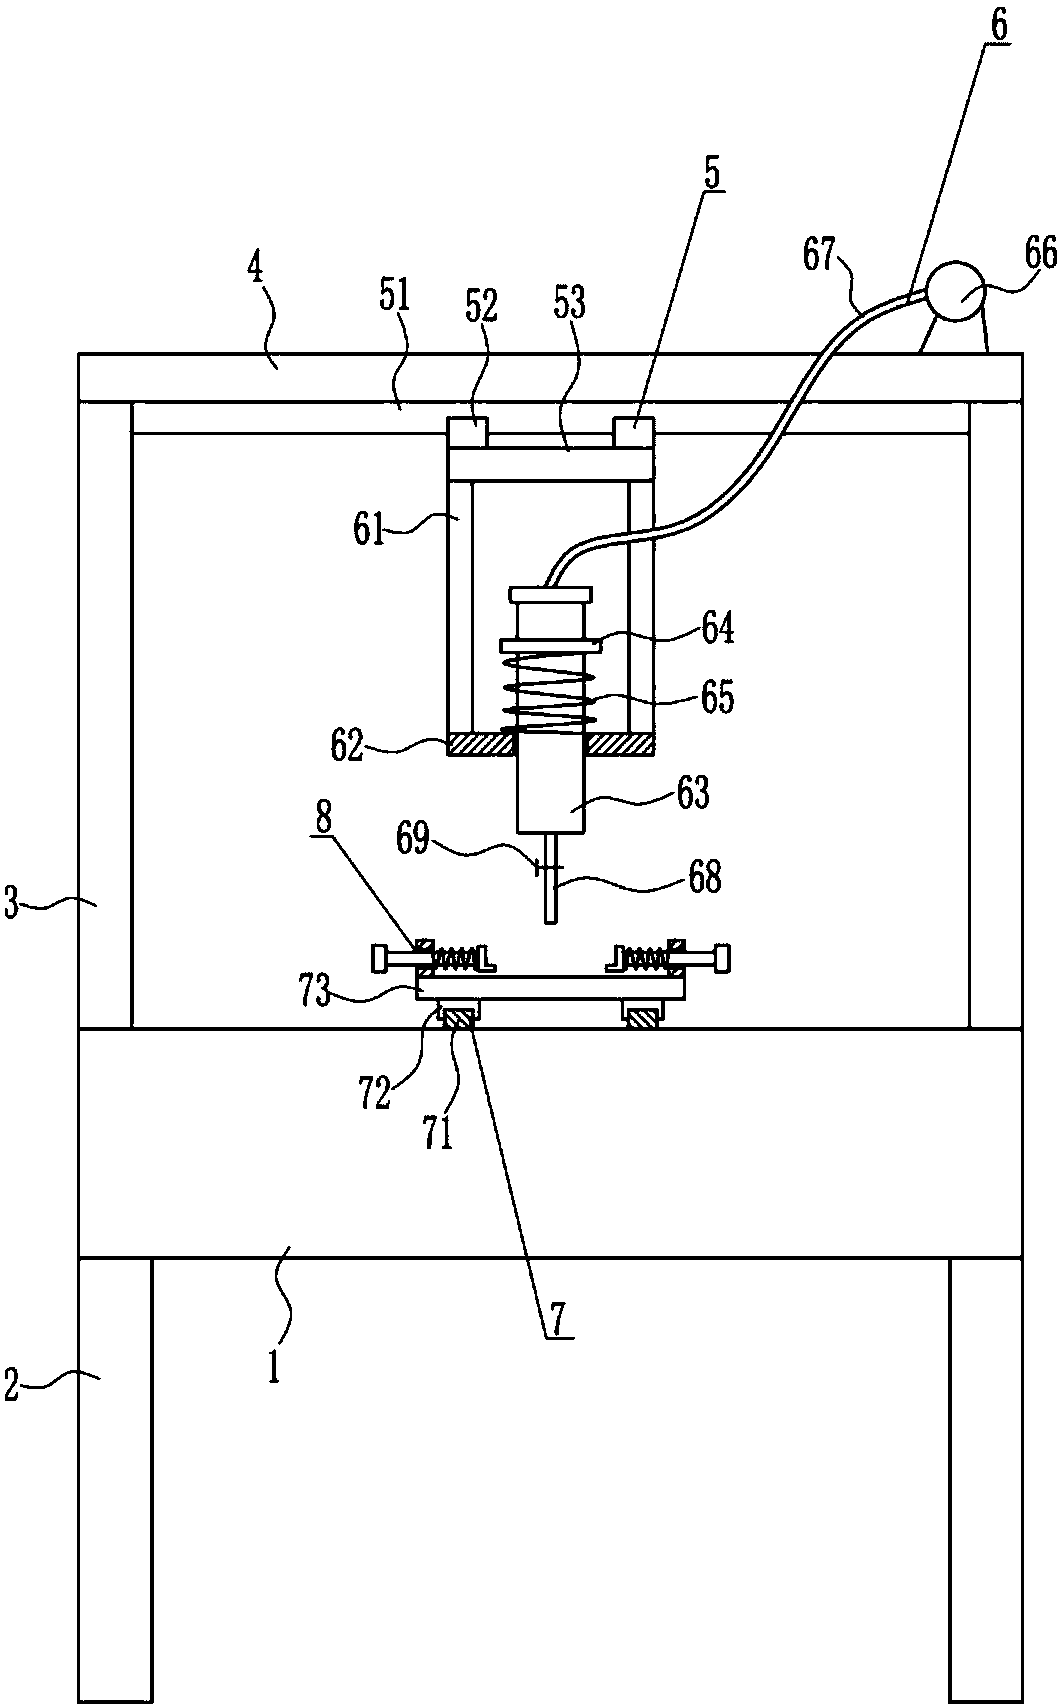 Glue dispensing equipment for integrated circuit packing